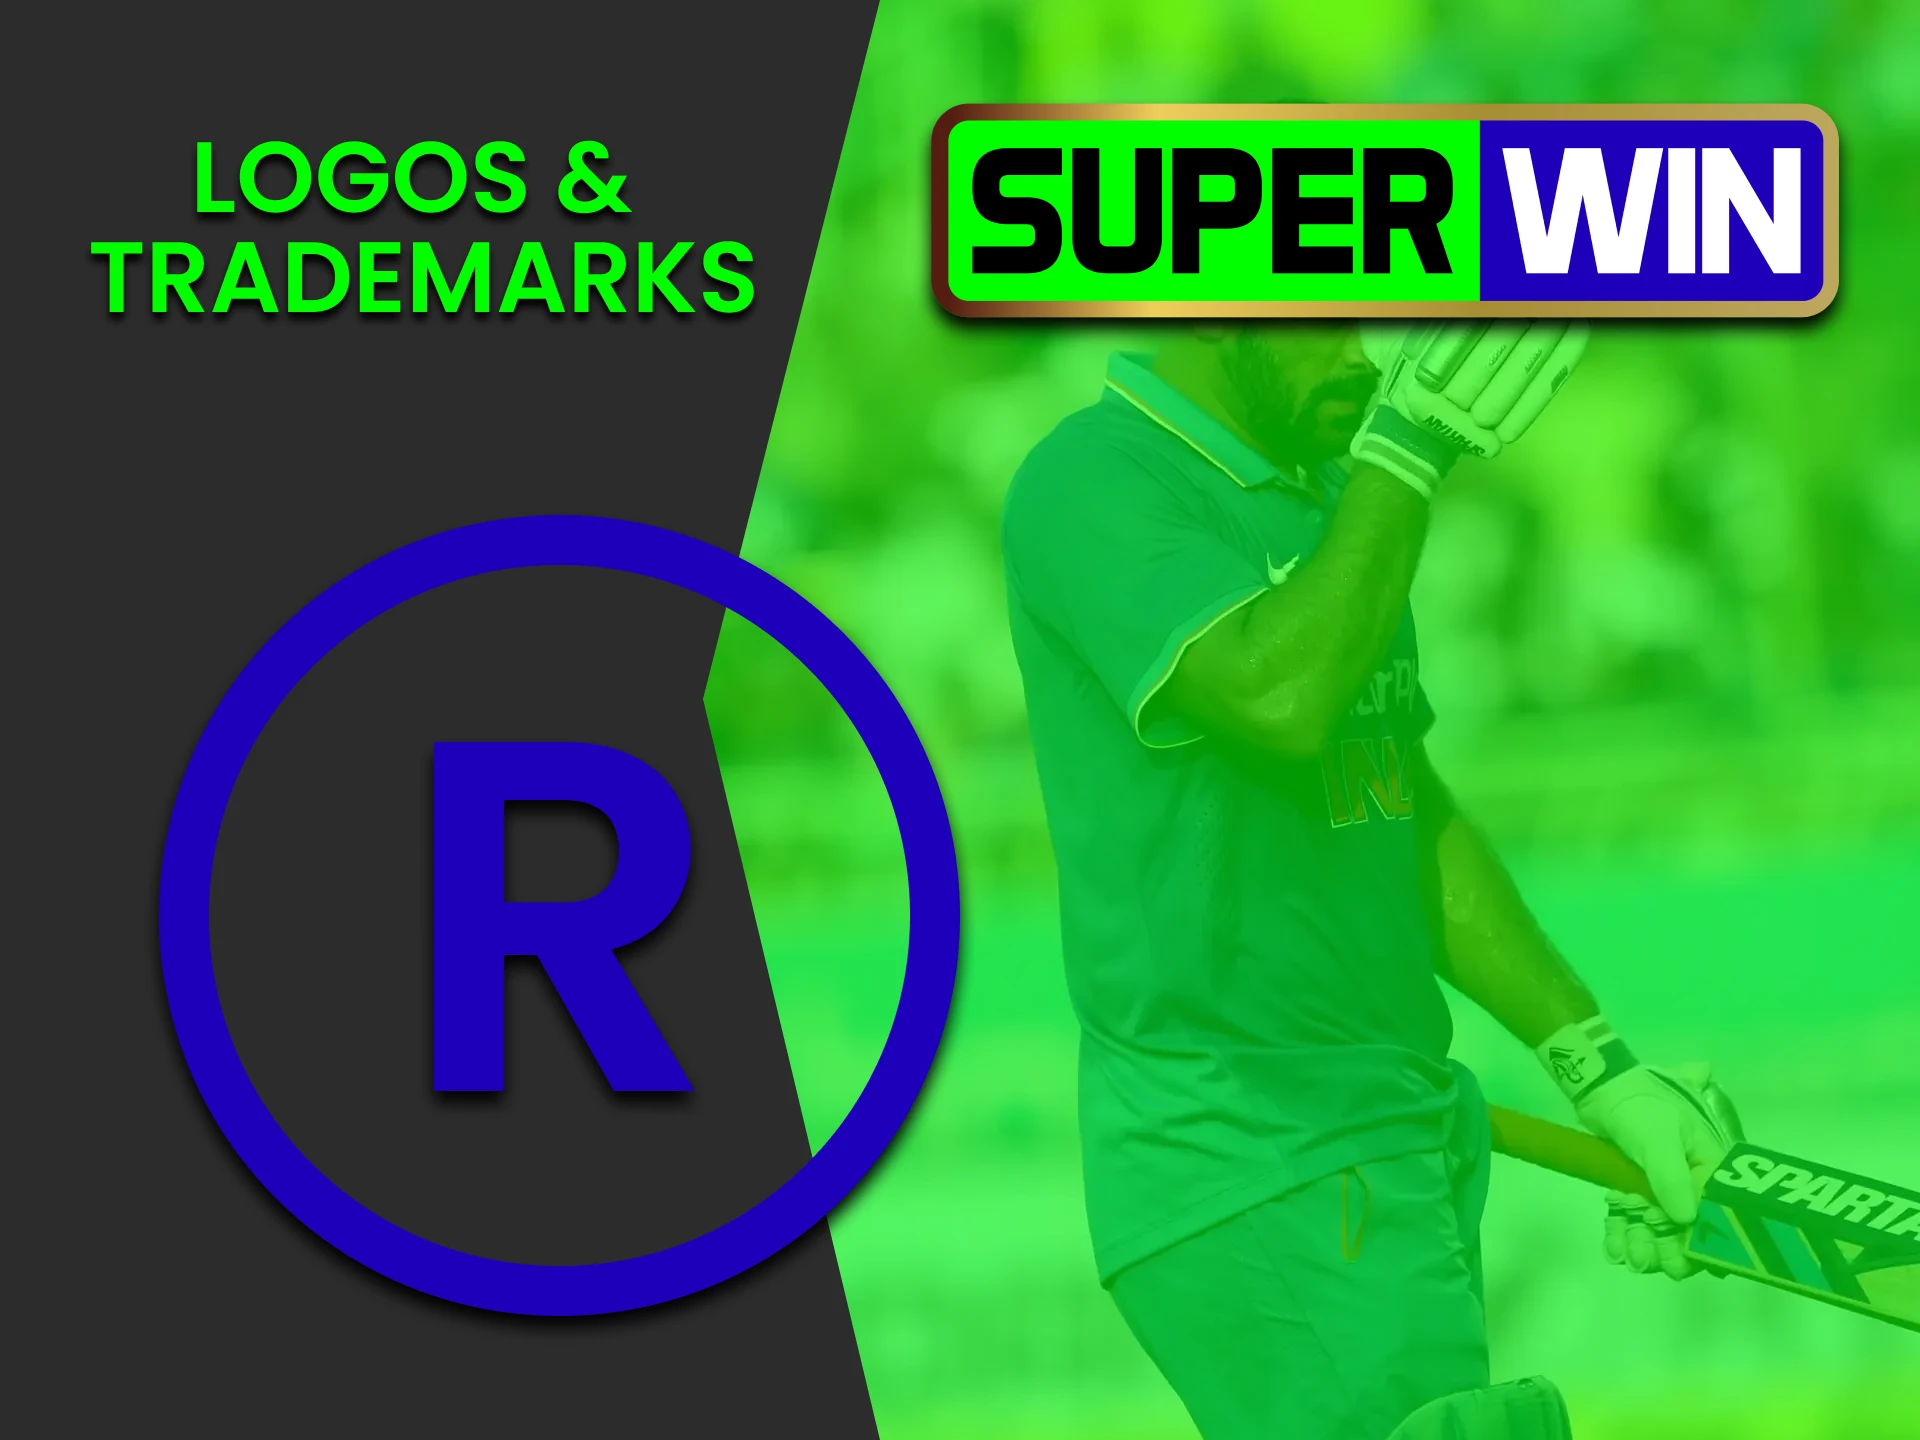 Find out who owns the trademarks on the Superwin website.